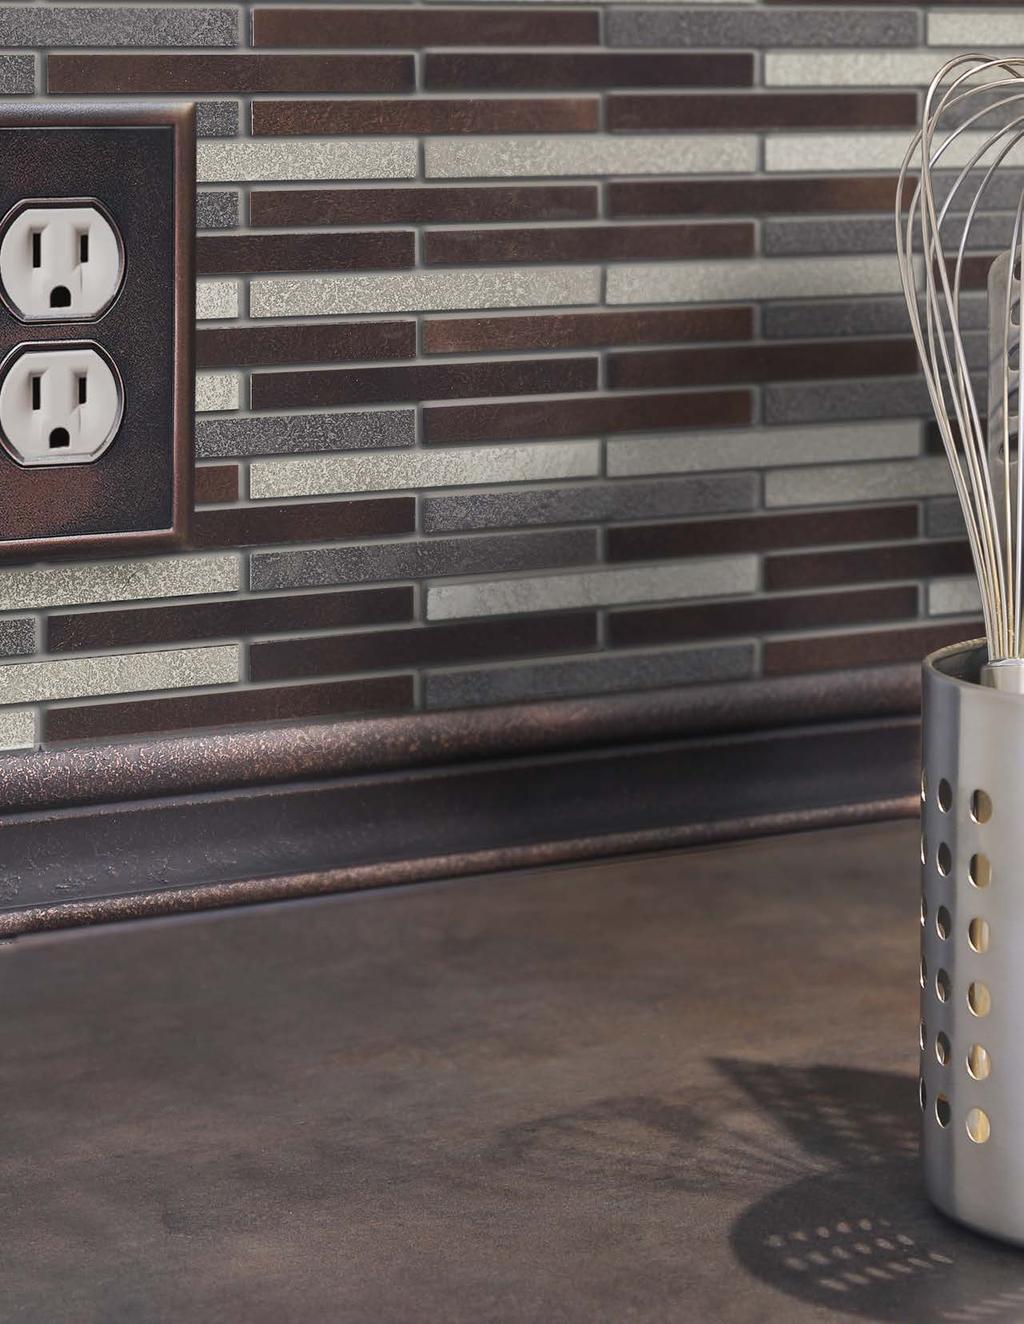 CITY CAST SCAPE METAL LINEAR SCULPTED FIELDMOLDINGS ANTIQUE + DARK OIL RUBBED BRONZE Questech's collection of Cast Metal expands to the bronze family with the warm versatility of Antique Bronze and